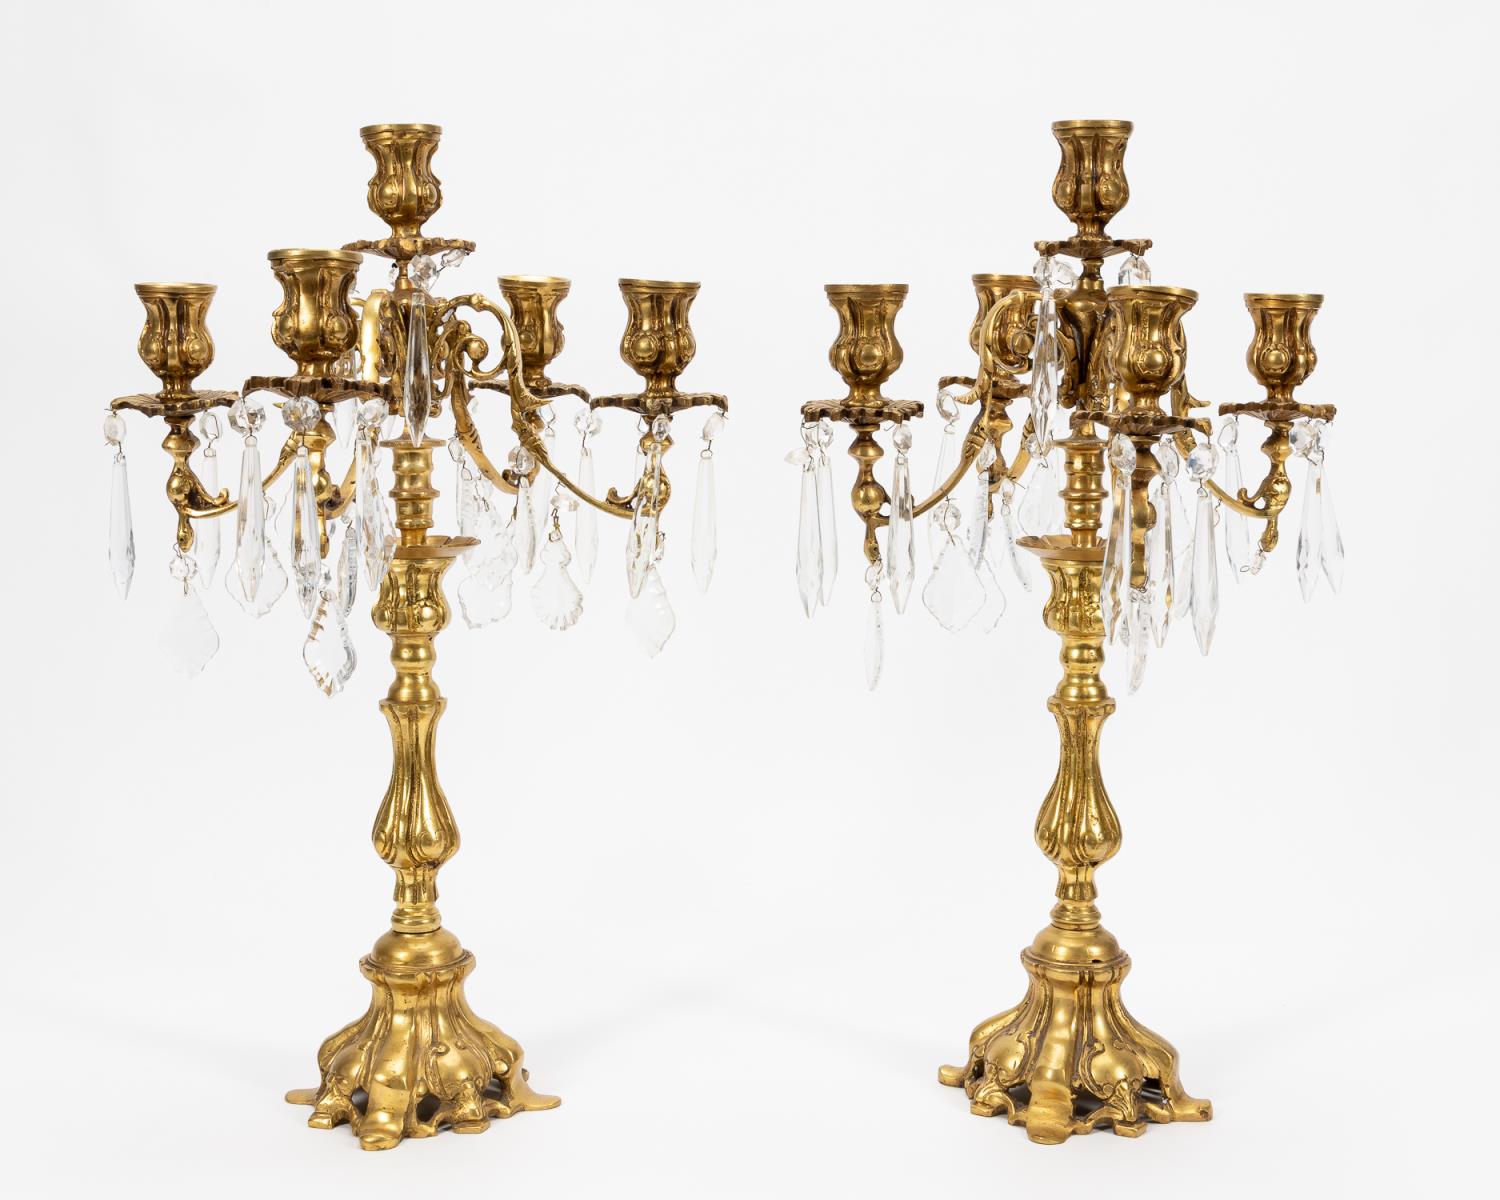 PAIR, ROCOCO-STYLE BRONZE & CRYSTAL